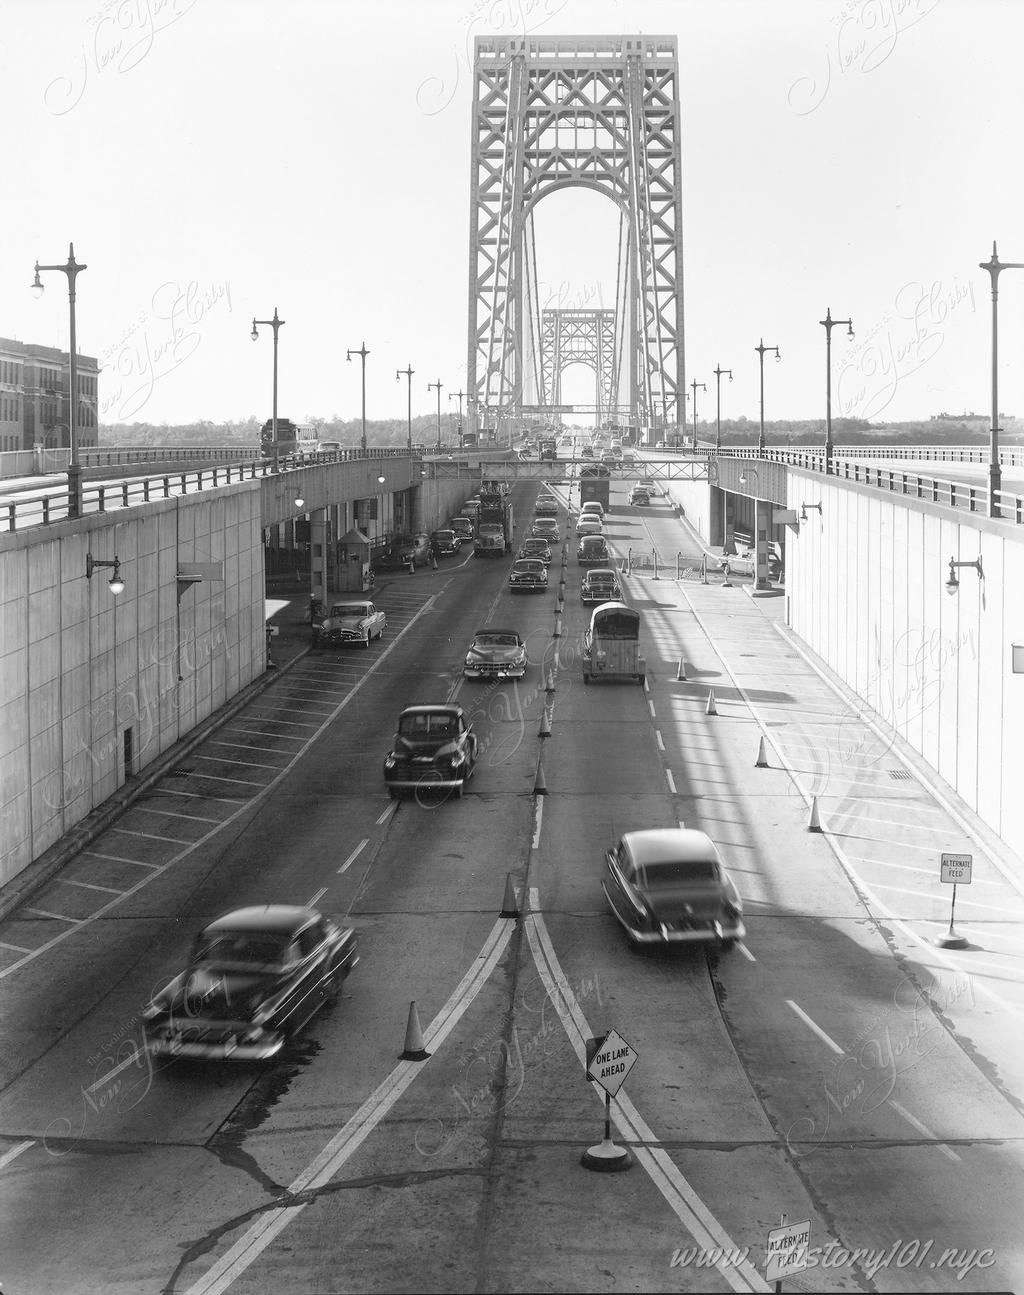 Photograph shows inbound and outbound traffic at the Manhattan side entrance of the George Washington Bridge, which was built in 1927.